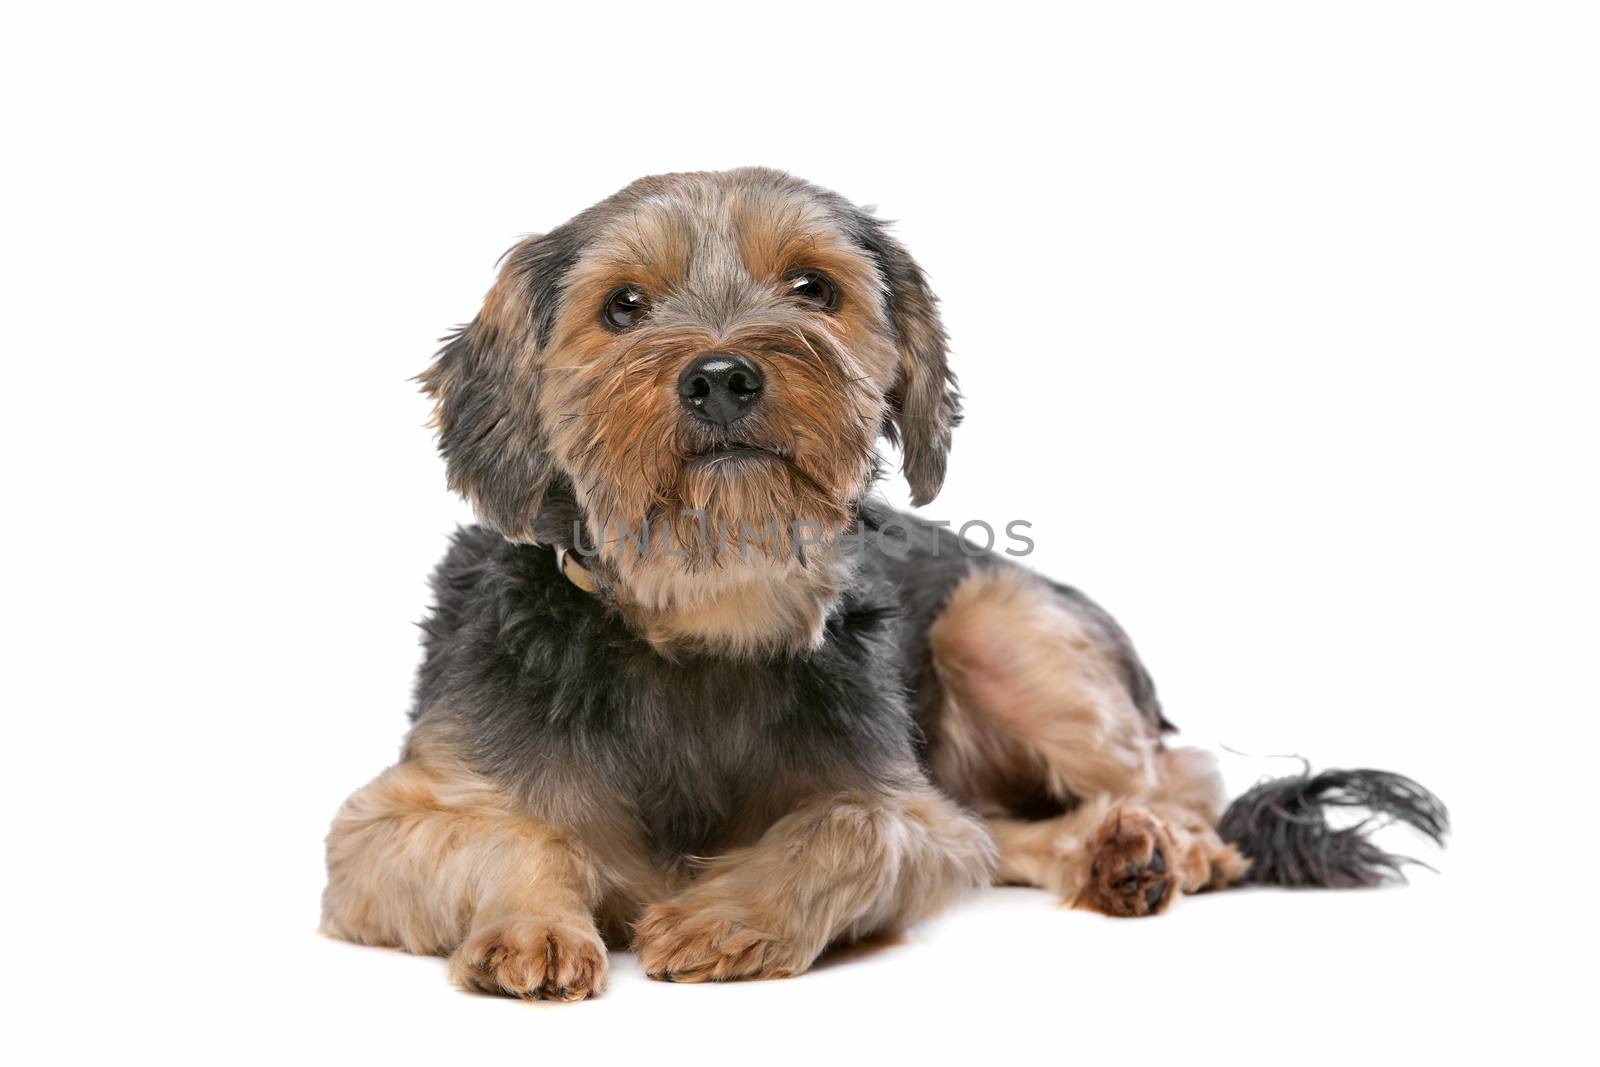 mixed breed Yorkshire Terrier in front of a white background